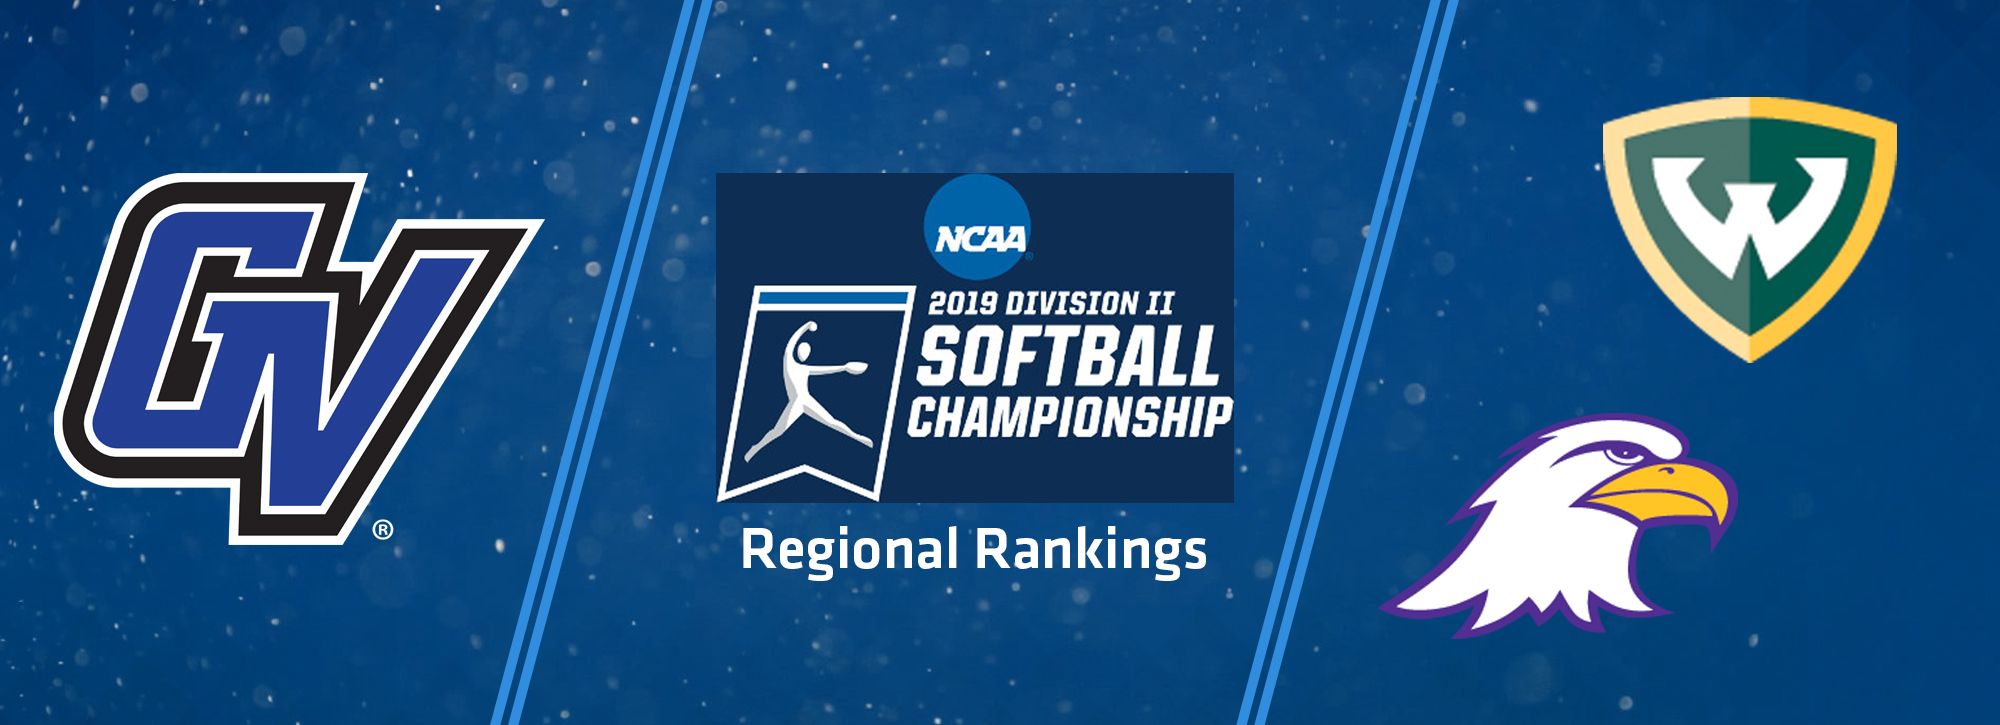 GVSU softball leads Midwest Region; Warriors and Eagles are also ranked